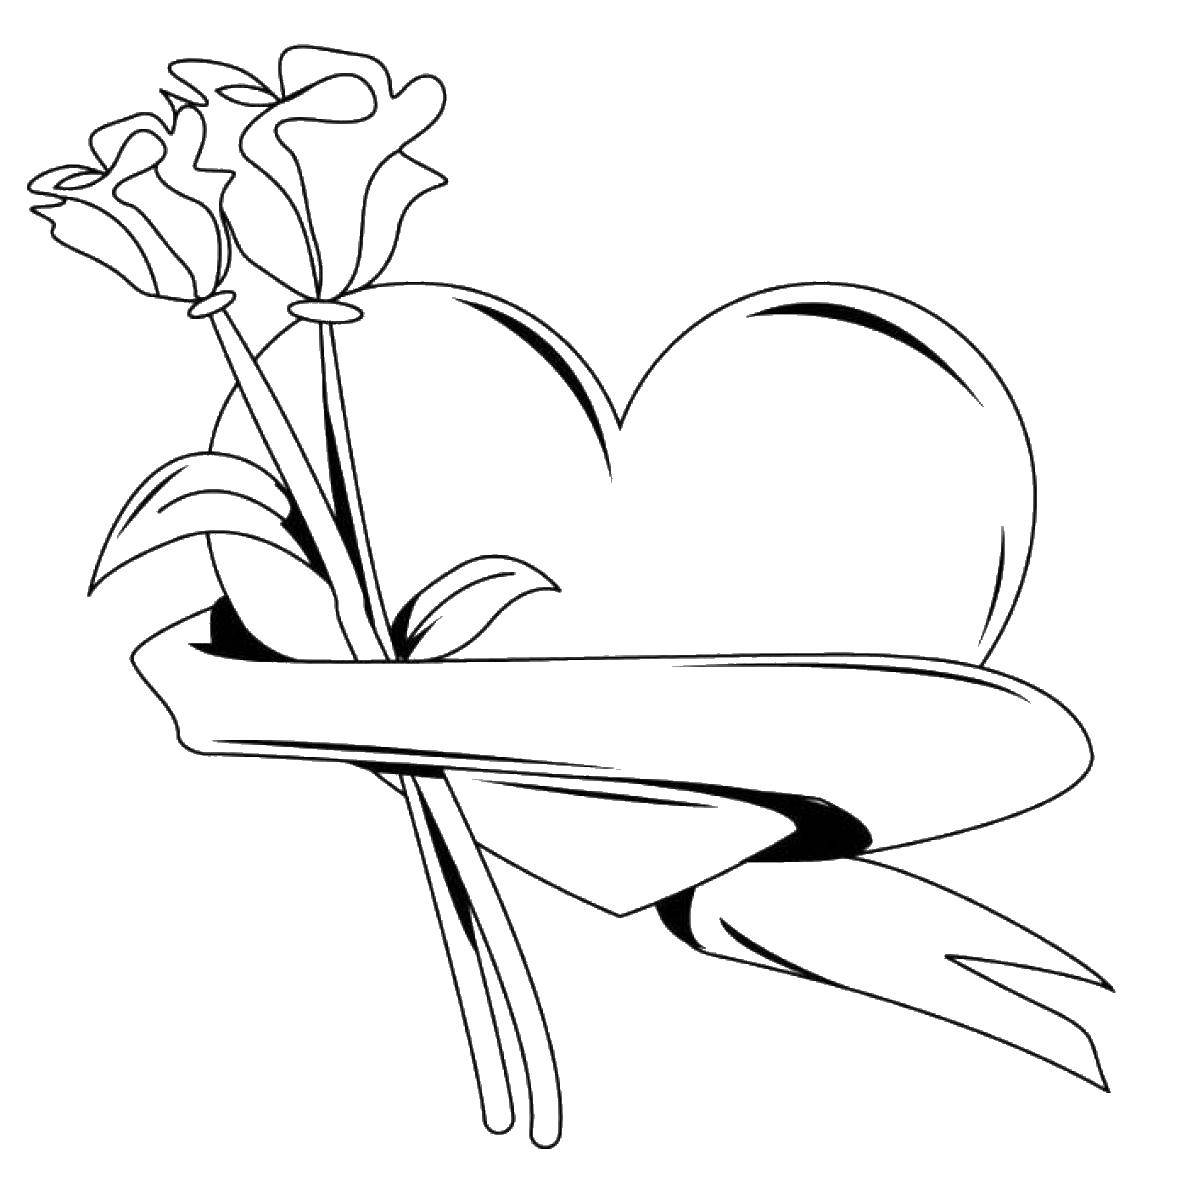 heart with roses coloring pages